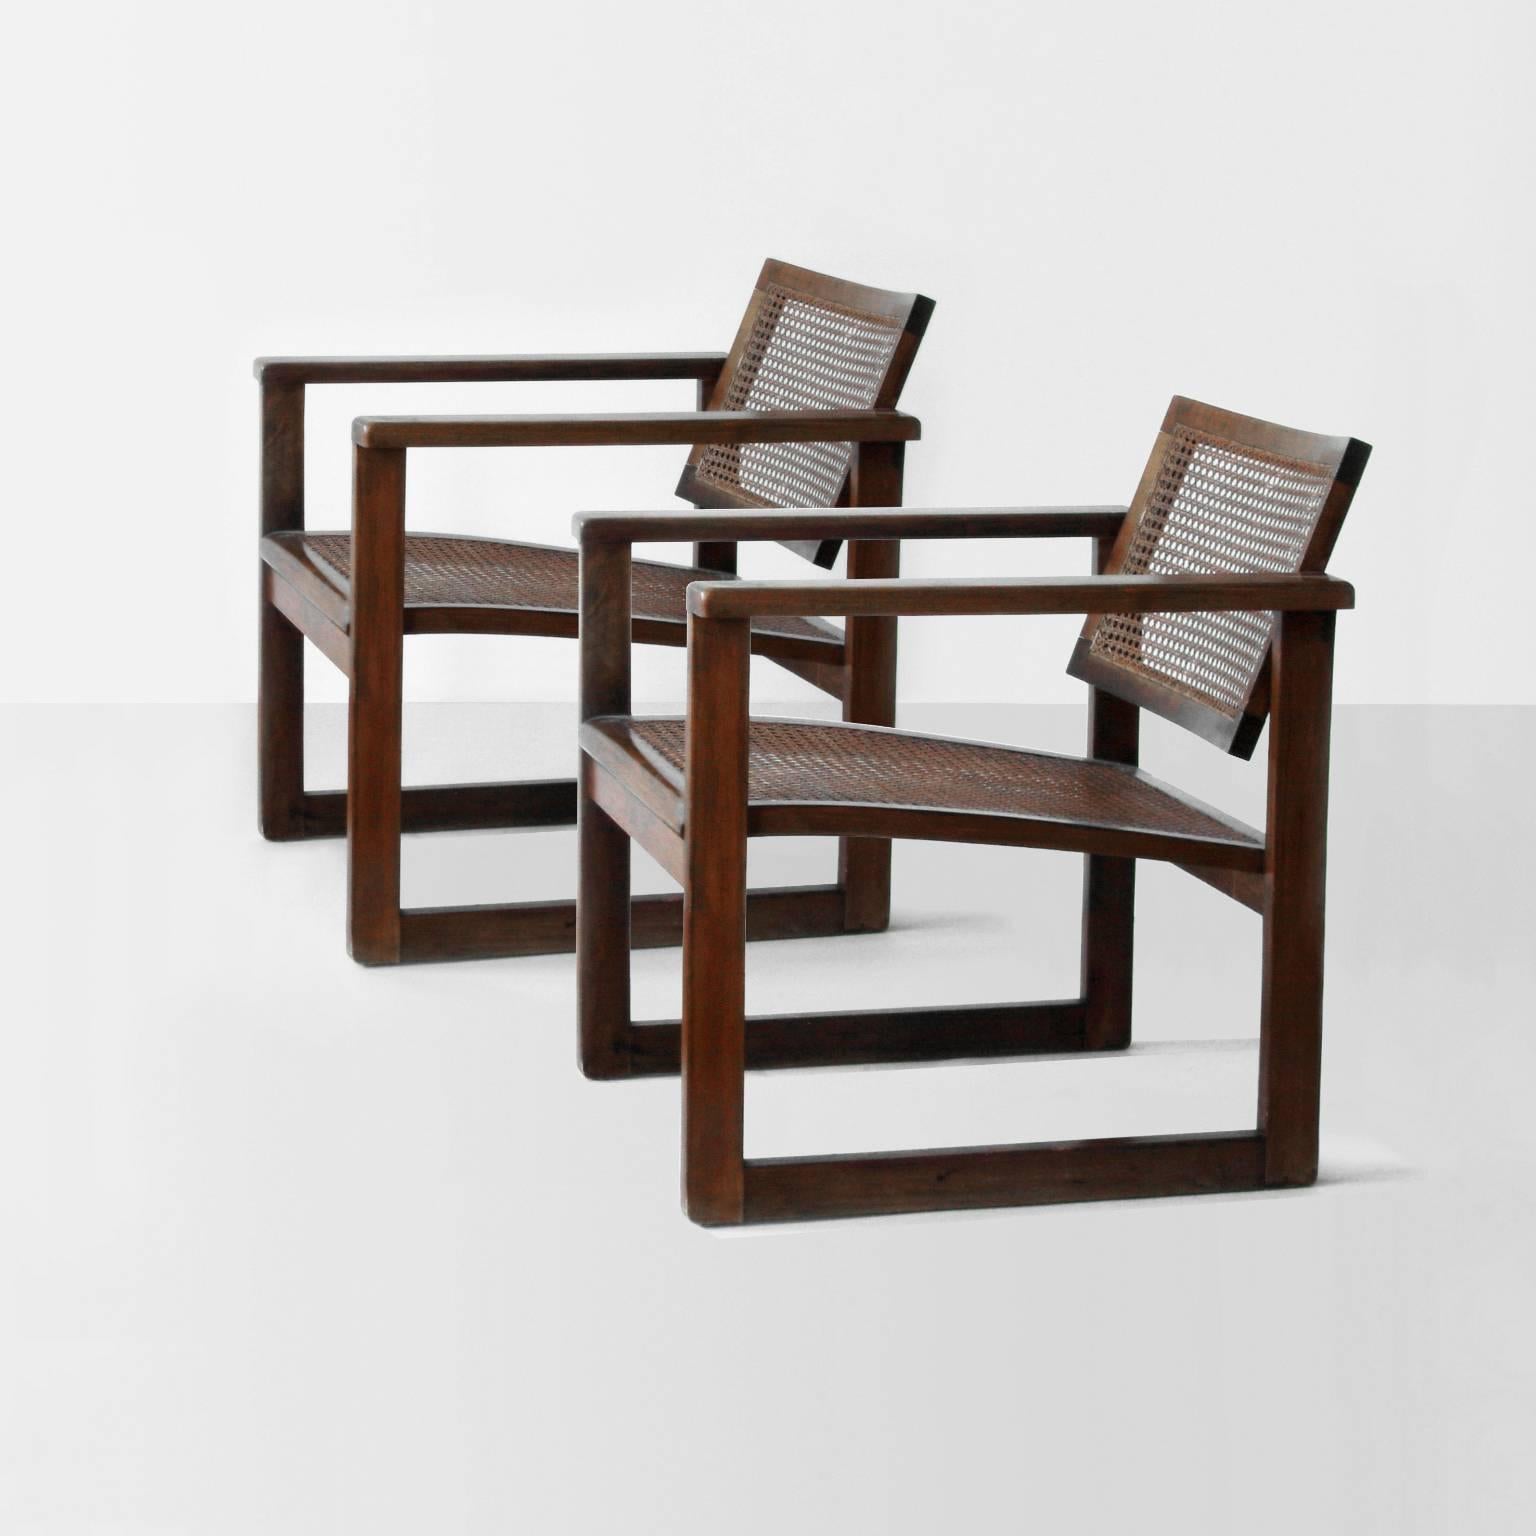 Bauhaus wooden Armchairs pair designed by Peter Keler in Weimar 1925-1926, and manufactured by Albert Walde Company in Waldheim, Germany, 1930.